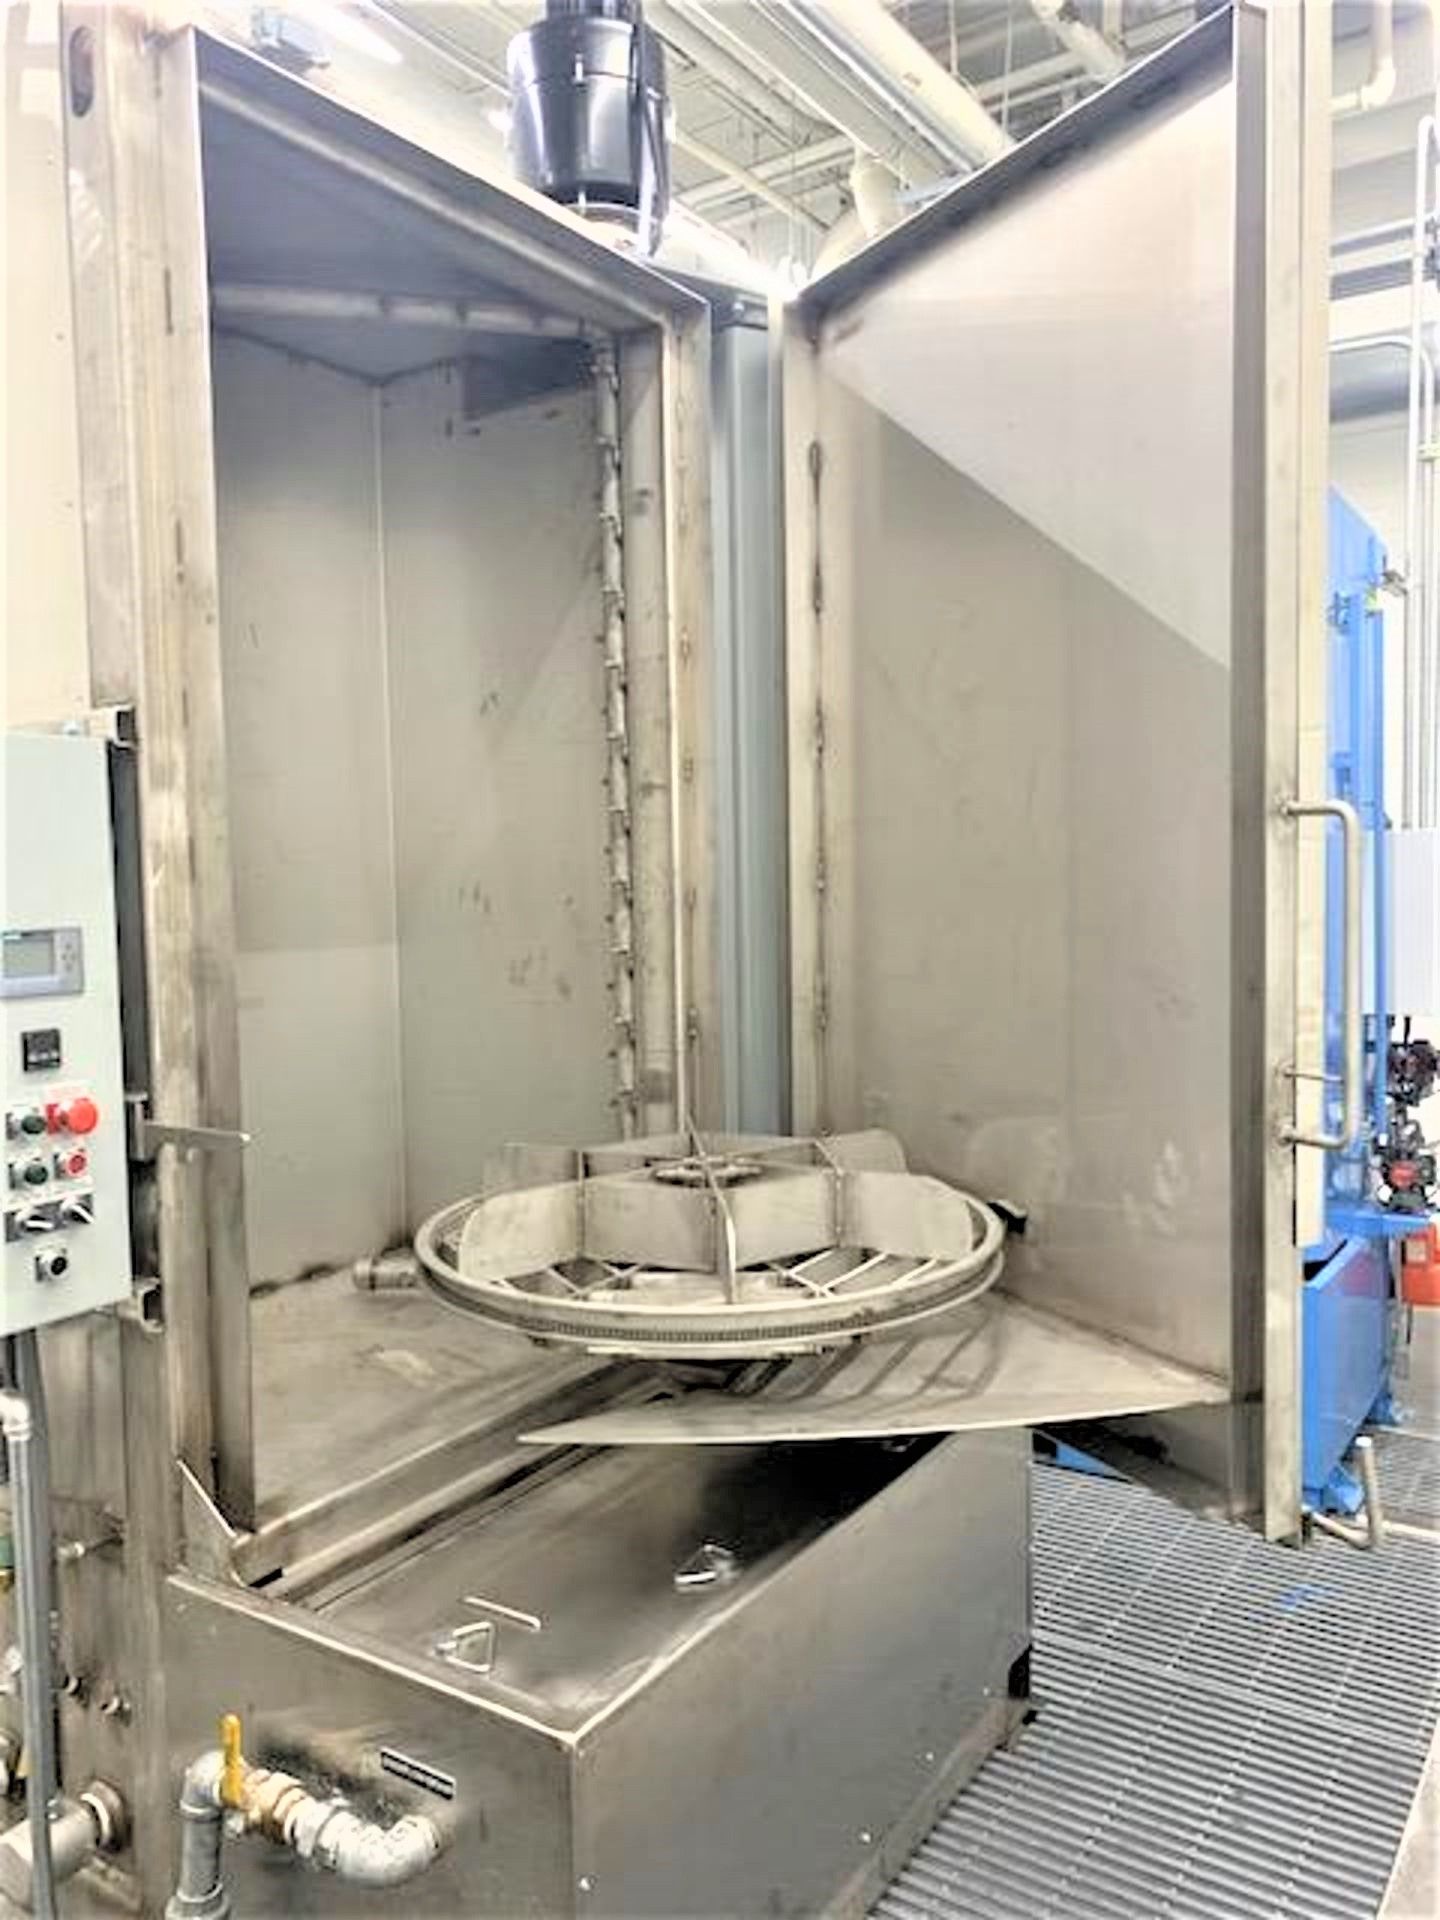 26"x66" AEC Systems Stainless Steel Aqueous-Based Cabinet Type Parts Washer, S/N NAF-2095-02-19, New - Image 2 of 8